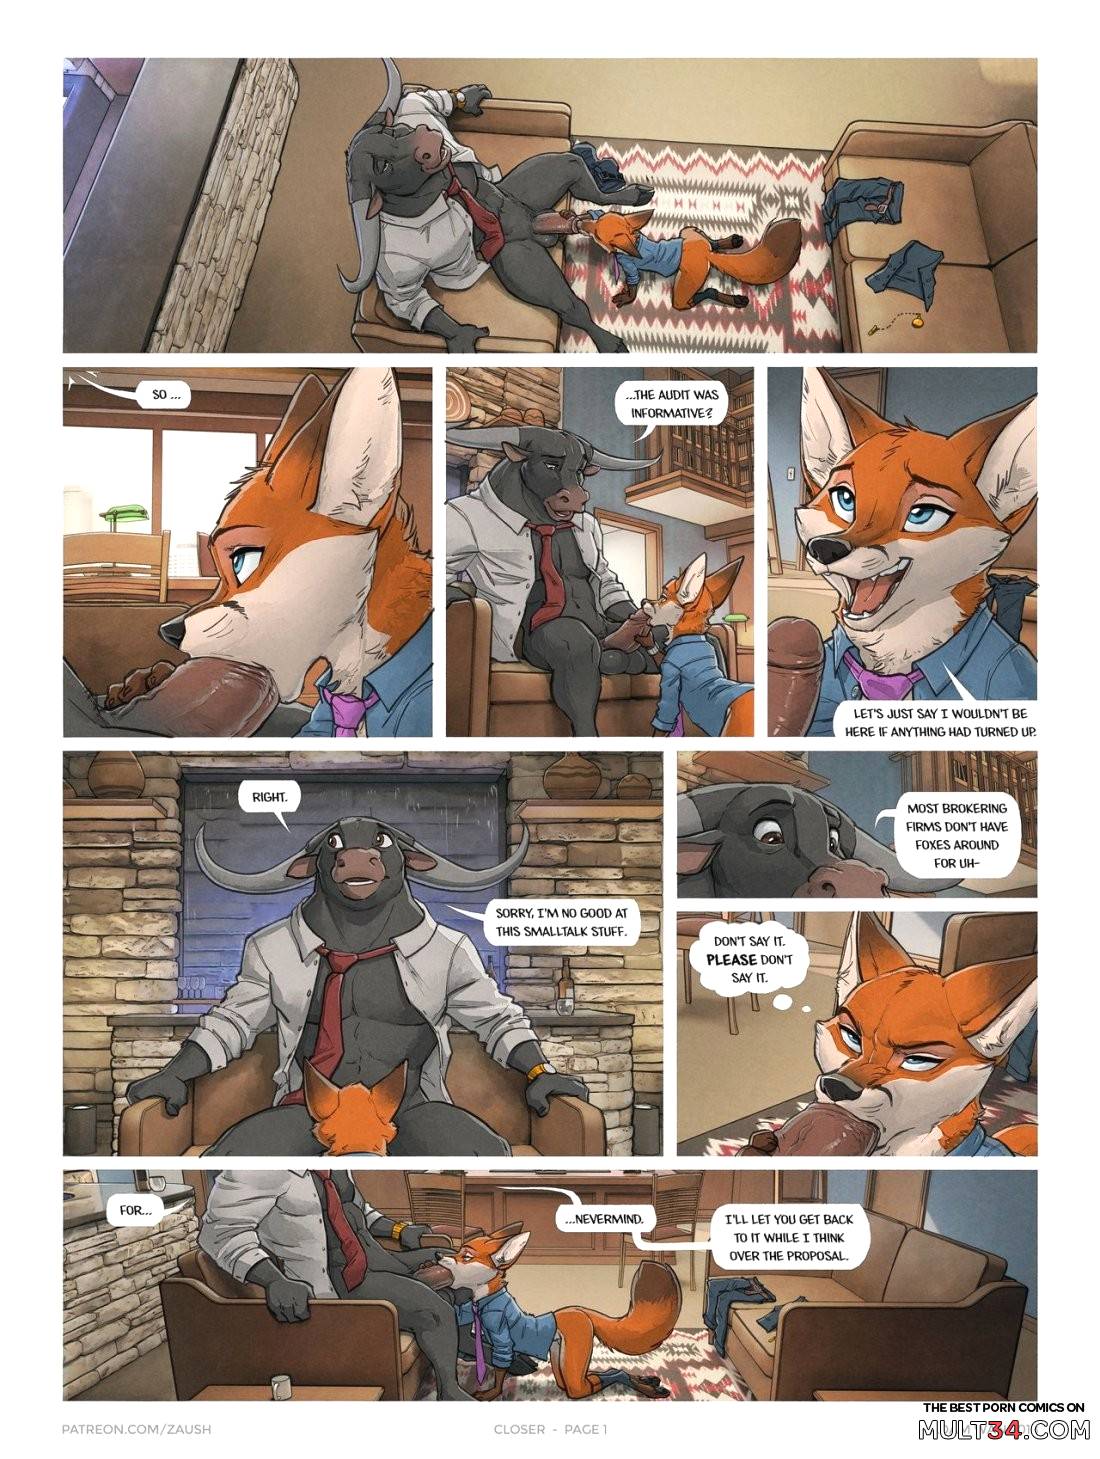 Closer page 1